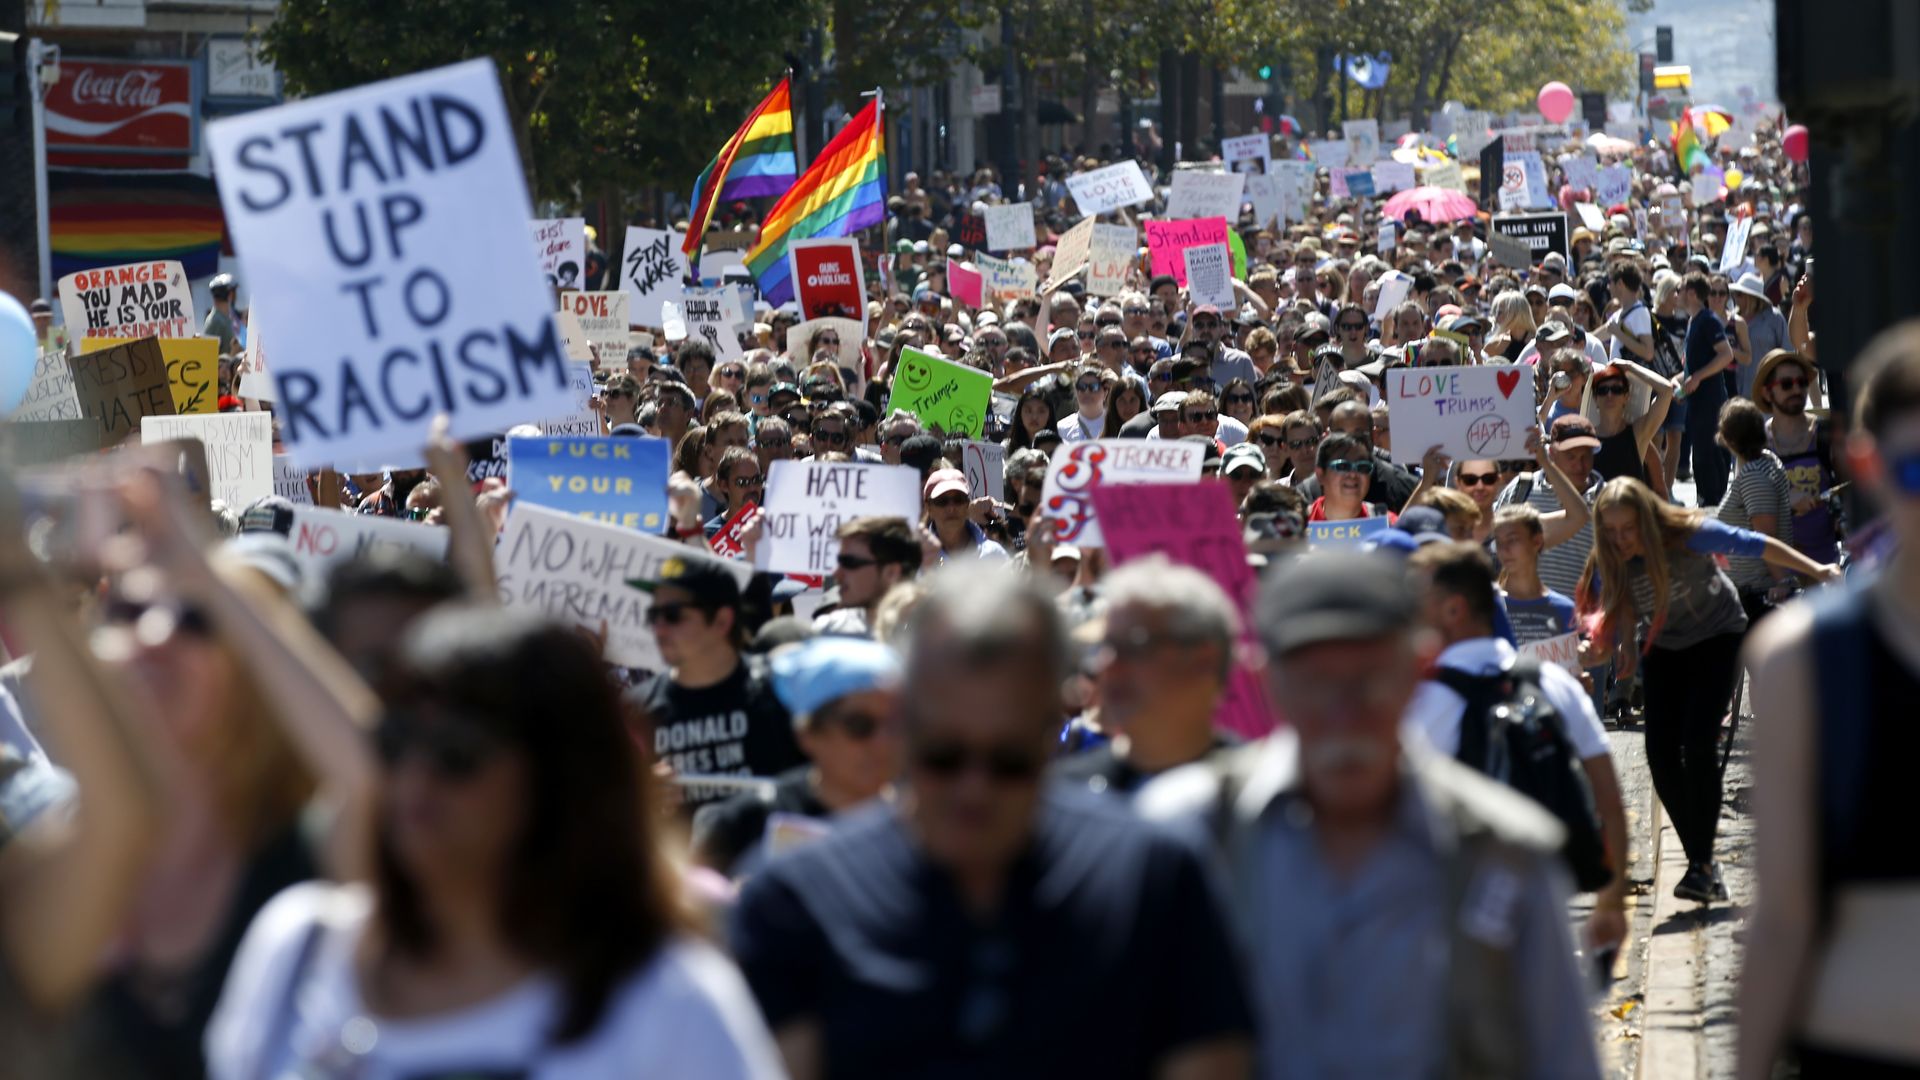 Photo of a crowd of people marching down the streets with Pride flags and "Stand up to racism" signs